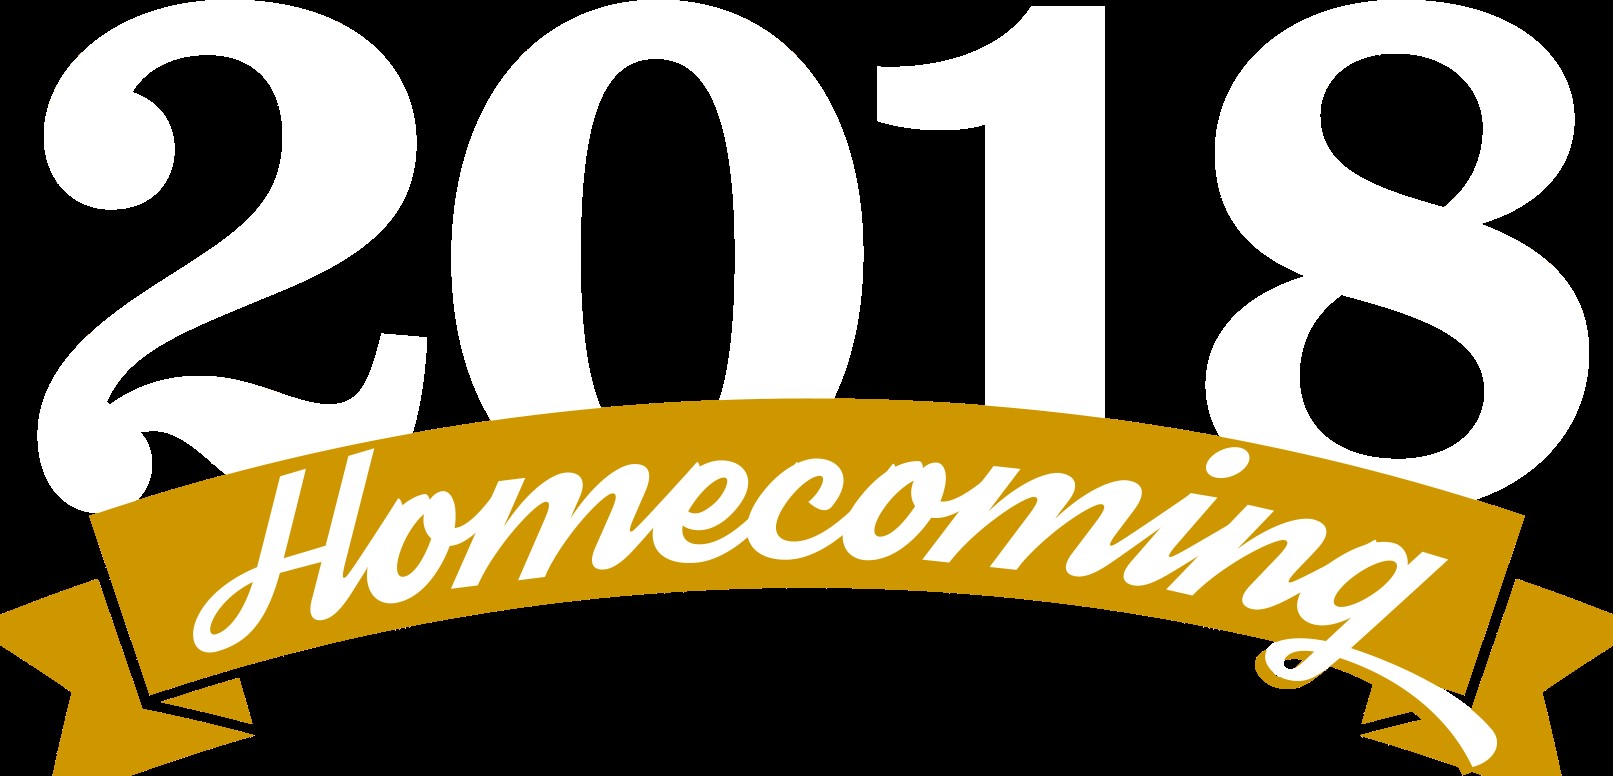 homecoming clipart high school homecoming